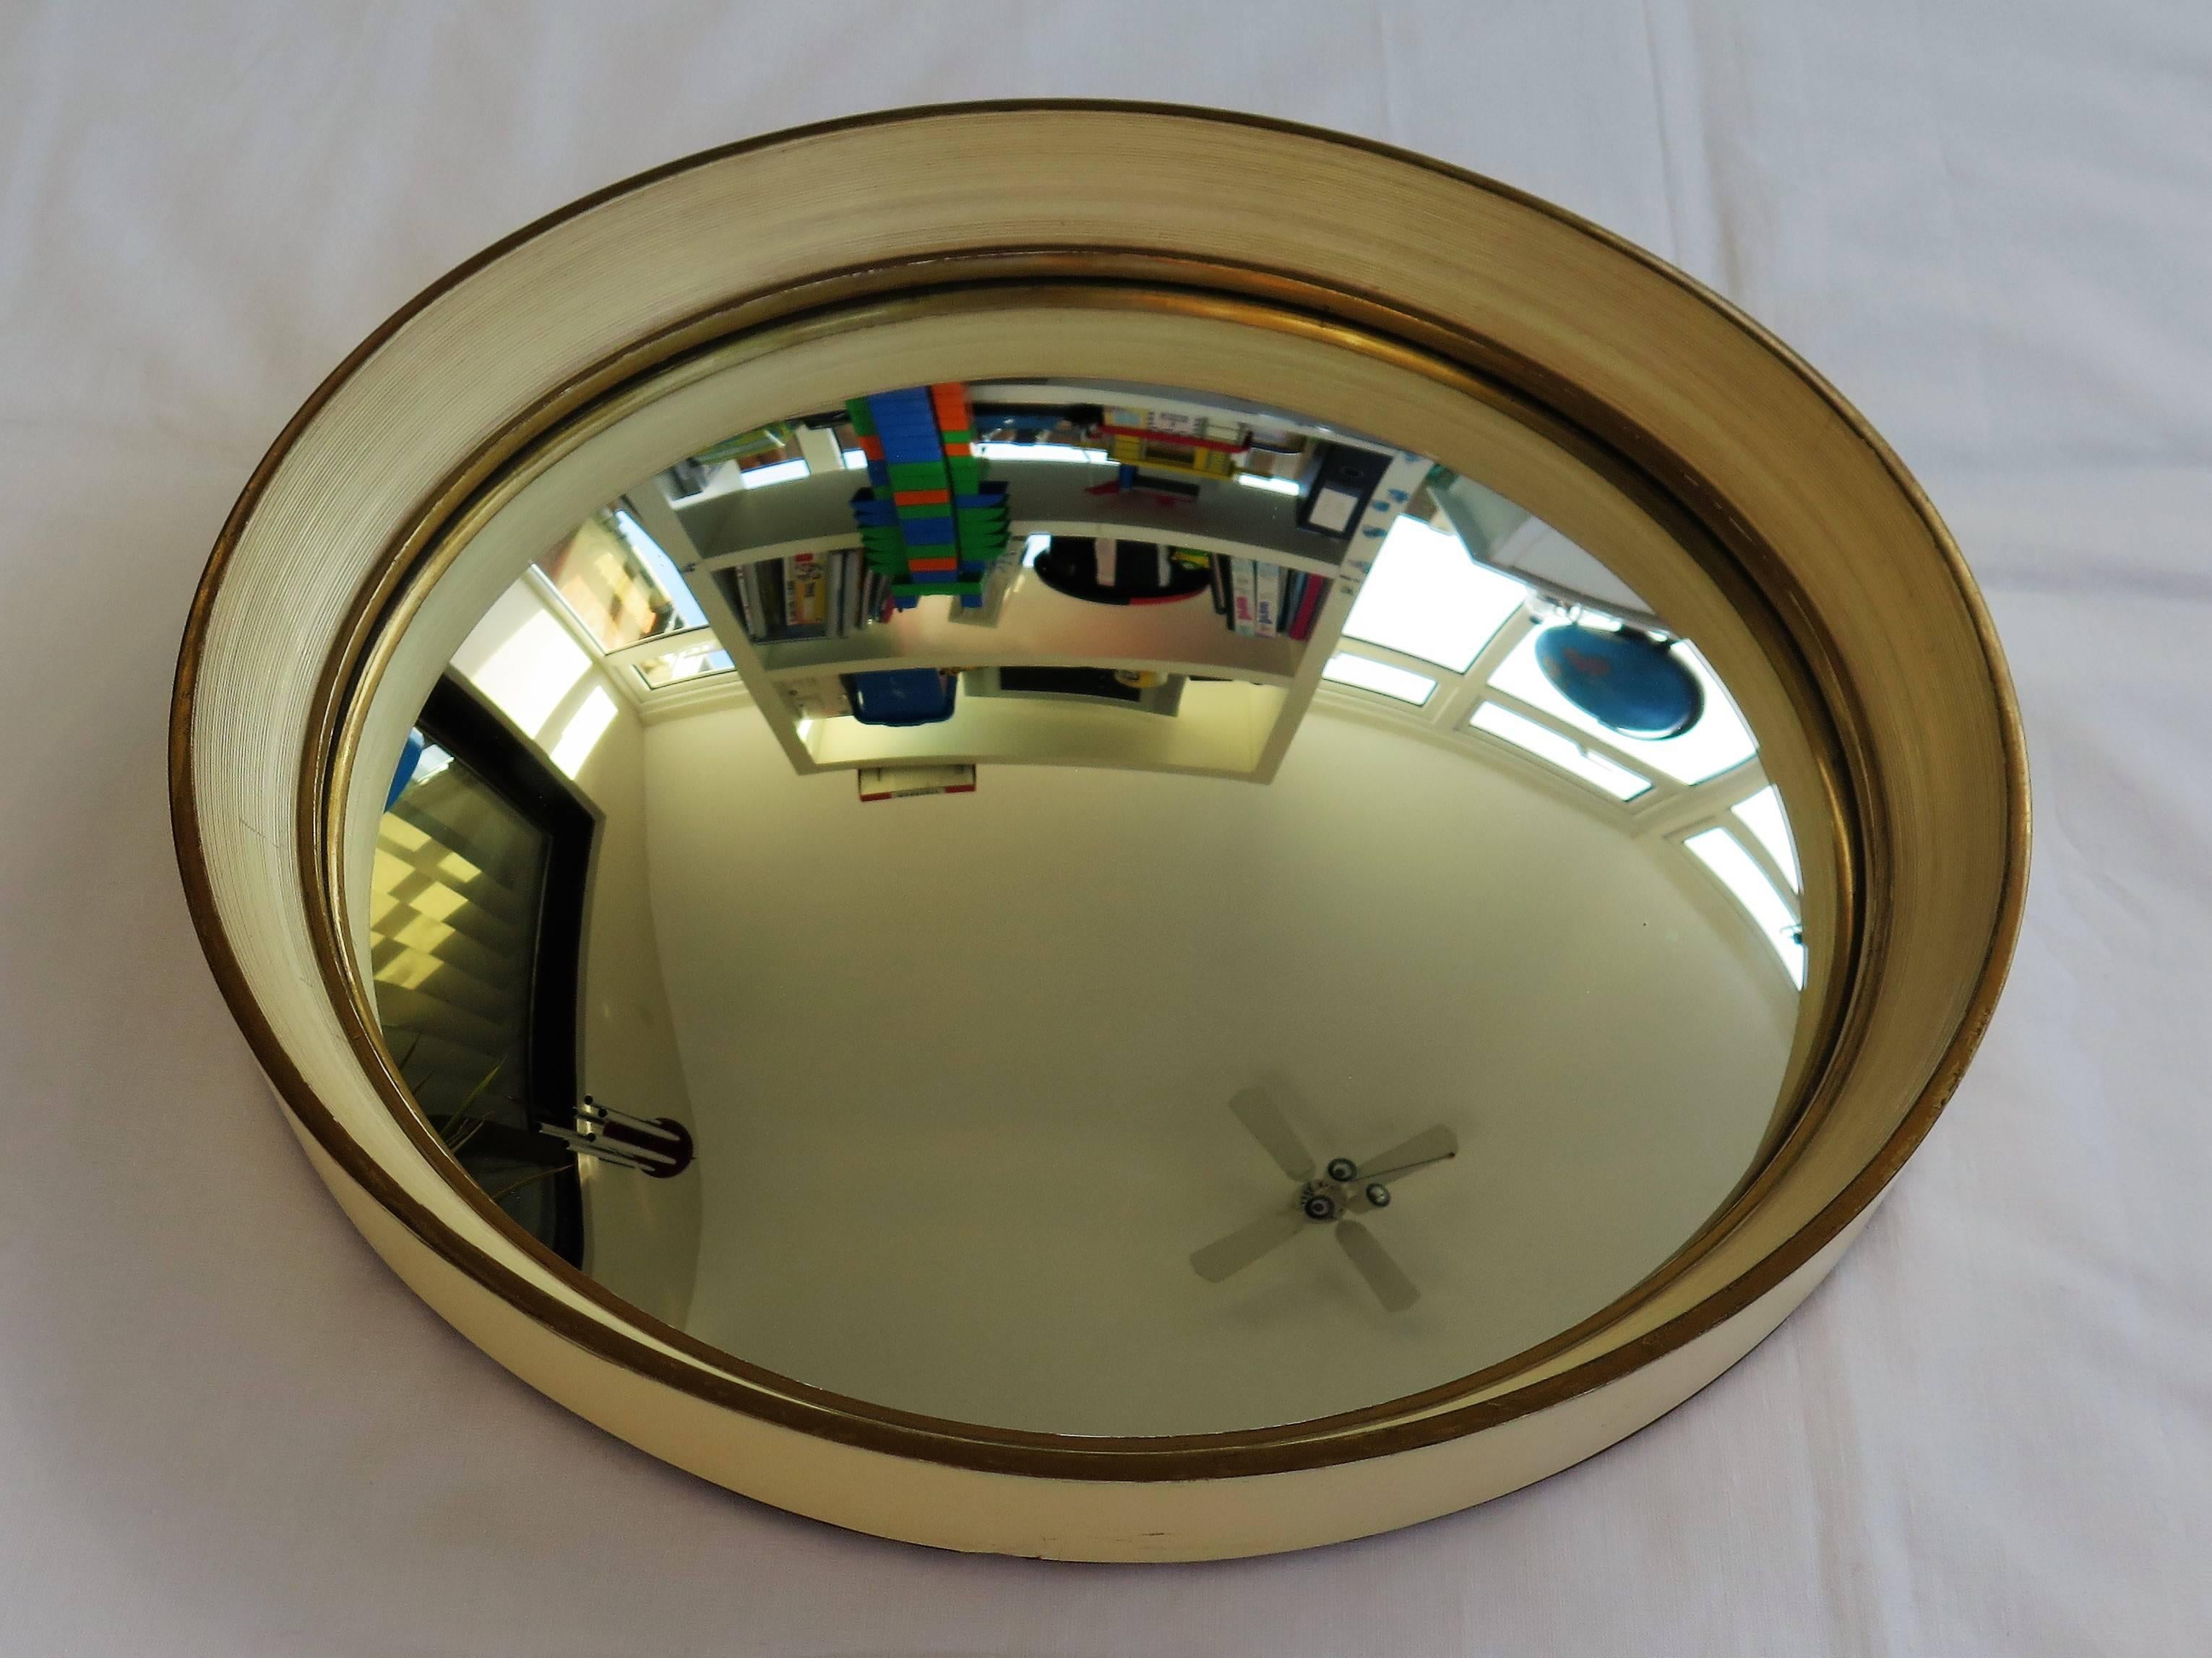 20th Century Round Convex Wall Mirror Turned Cream Wood Frame with Gilt Detail, Ca. 1925